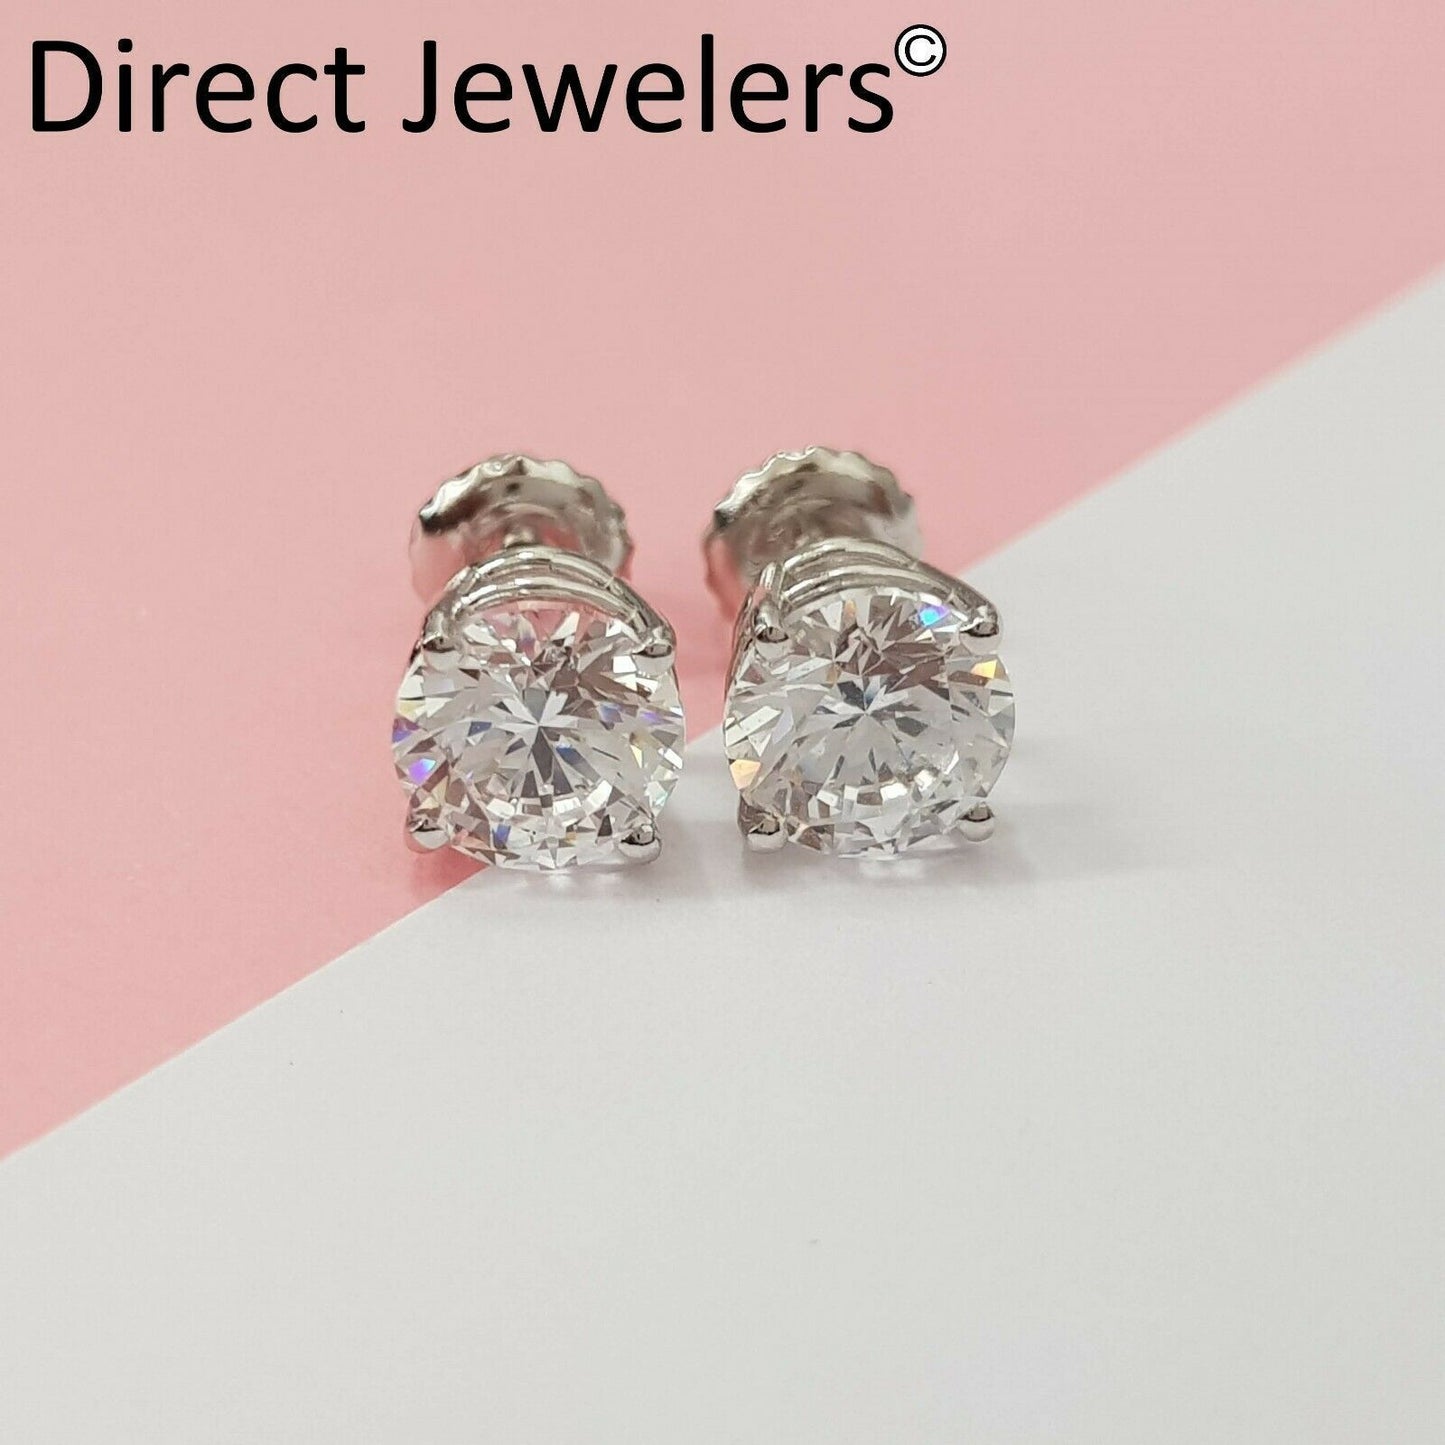 2.00ct ROUND CUT Certified diamond stud earrings 14k WHITE GOLD D SI1 NATURAL